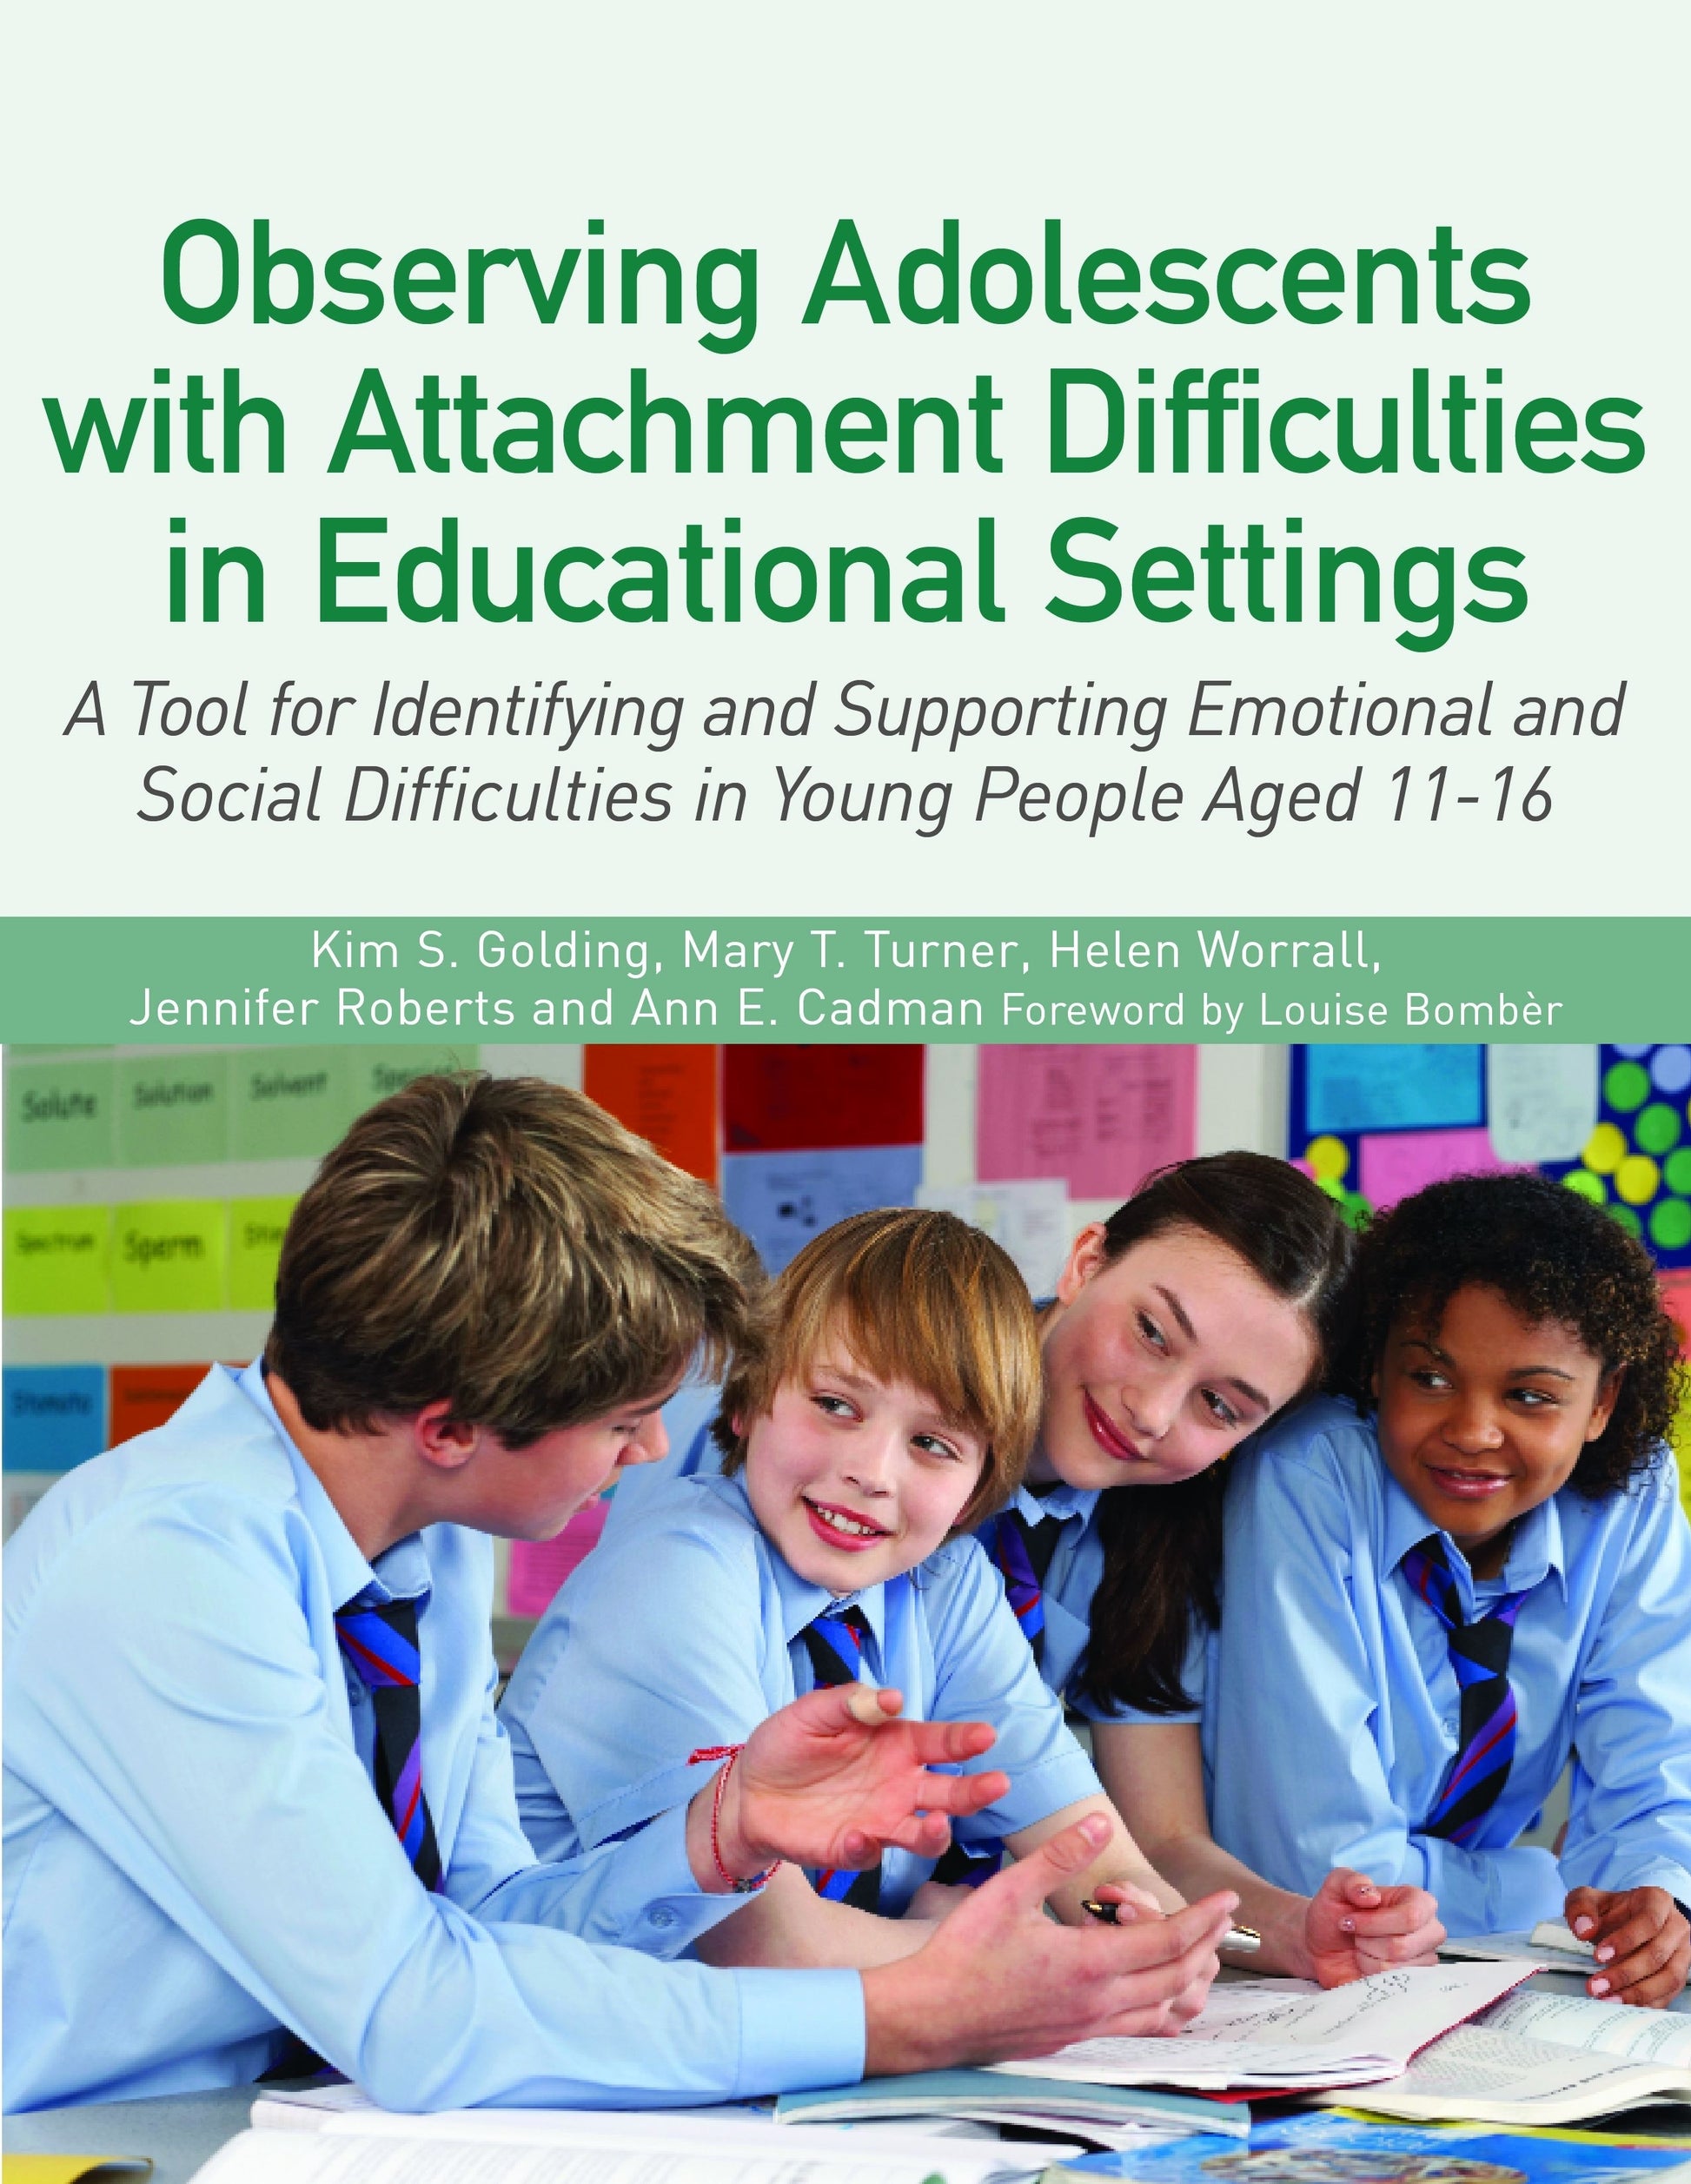 Observing Adolescents with Attachment Difficulties in Educational Settings by Kim S. Golding, Helen Worrall, Mary Turner, Ann Cadman, Jennifer Roberts, Louise Michelle Bombèr